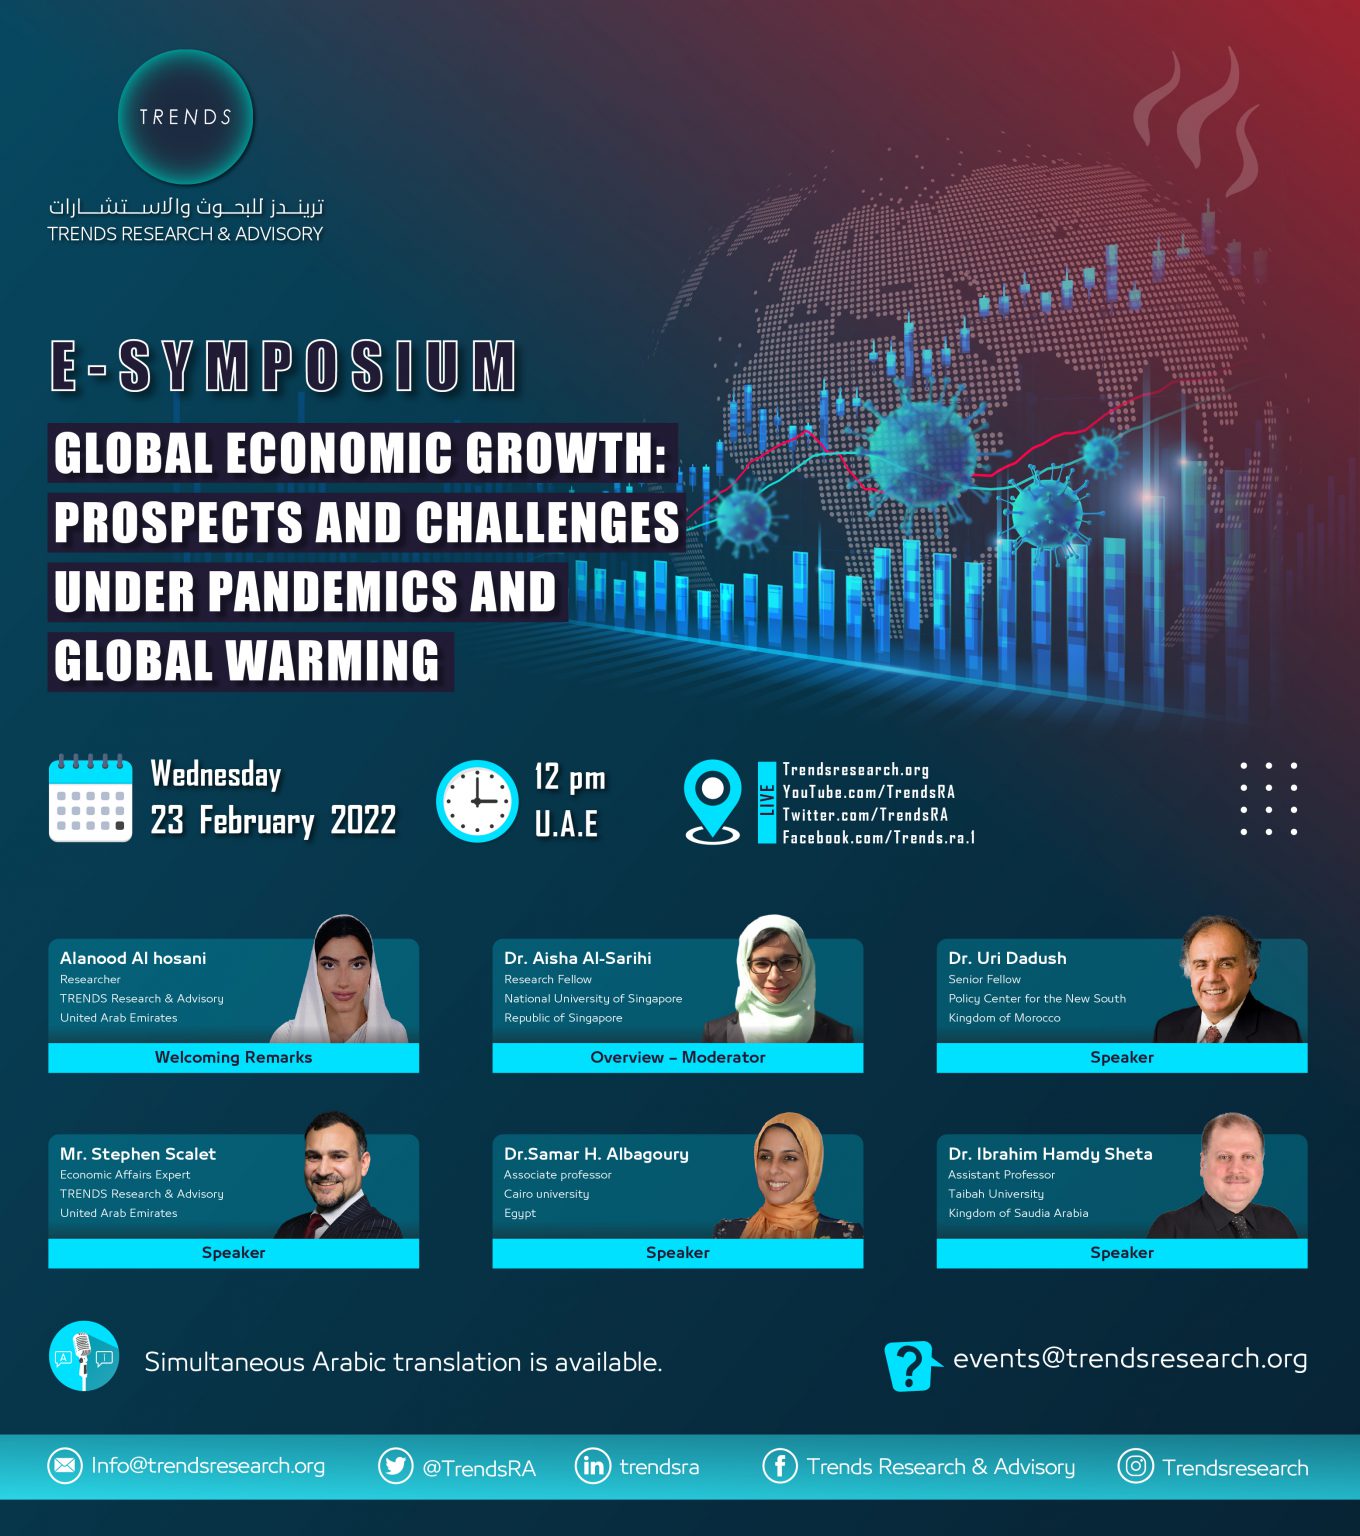 Global Economic Growth: Prospects and Challenges under Pandemics and Global Warming